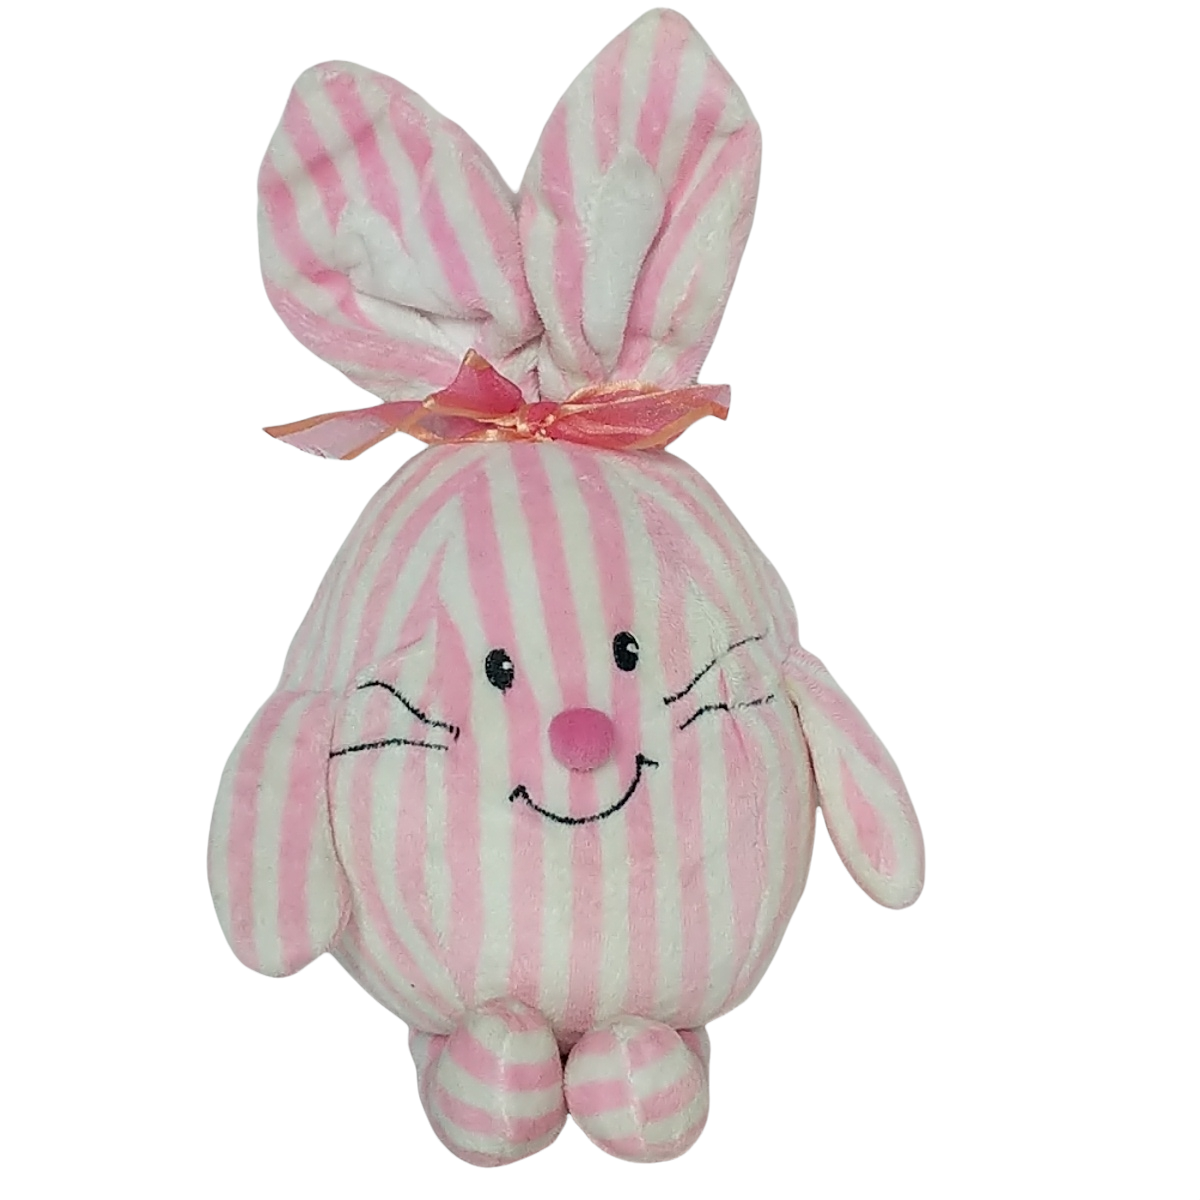 Commonwealth Easter Bunny Spring Pink White Striped Stuffed Animal 2002 12" - $44.55